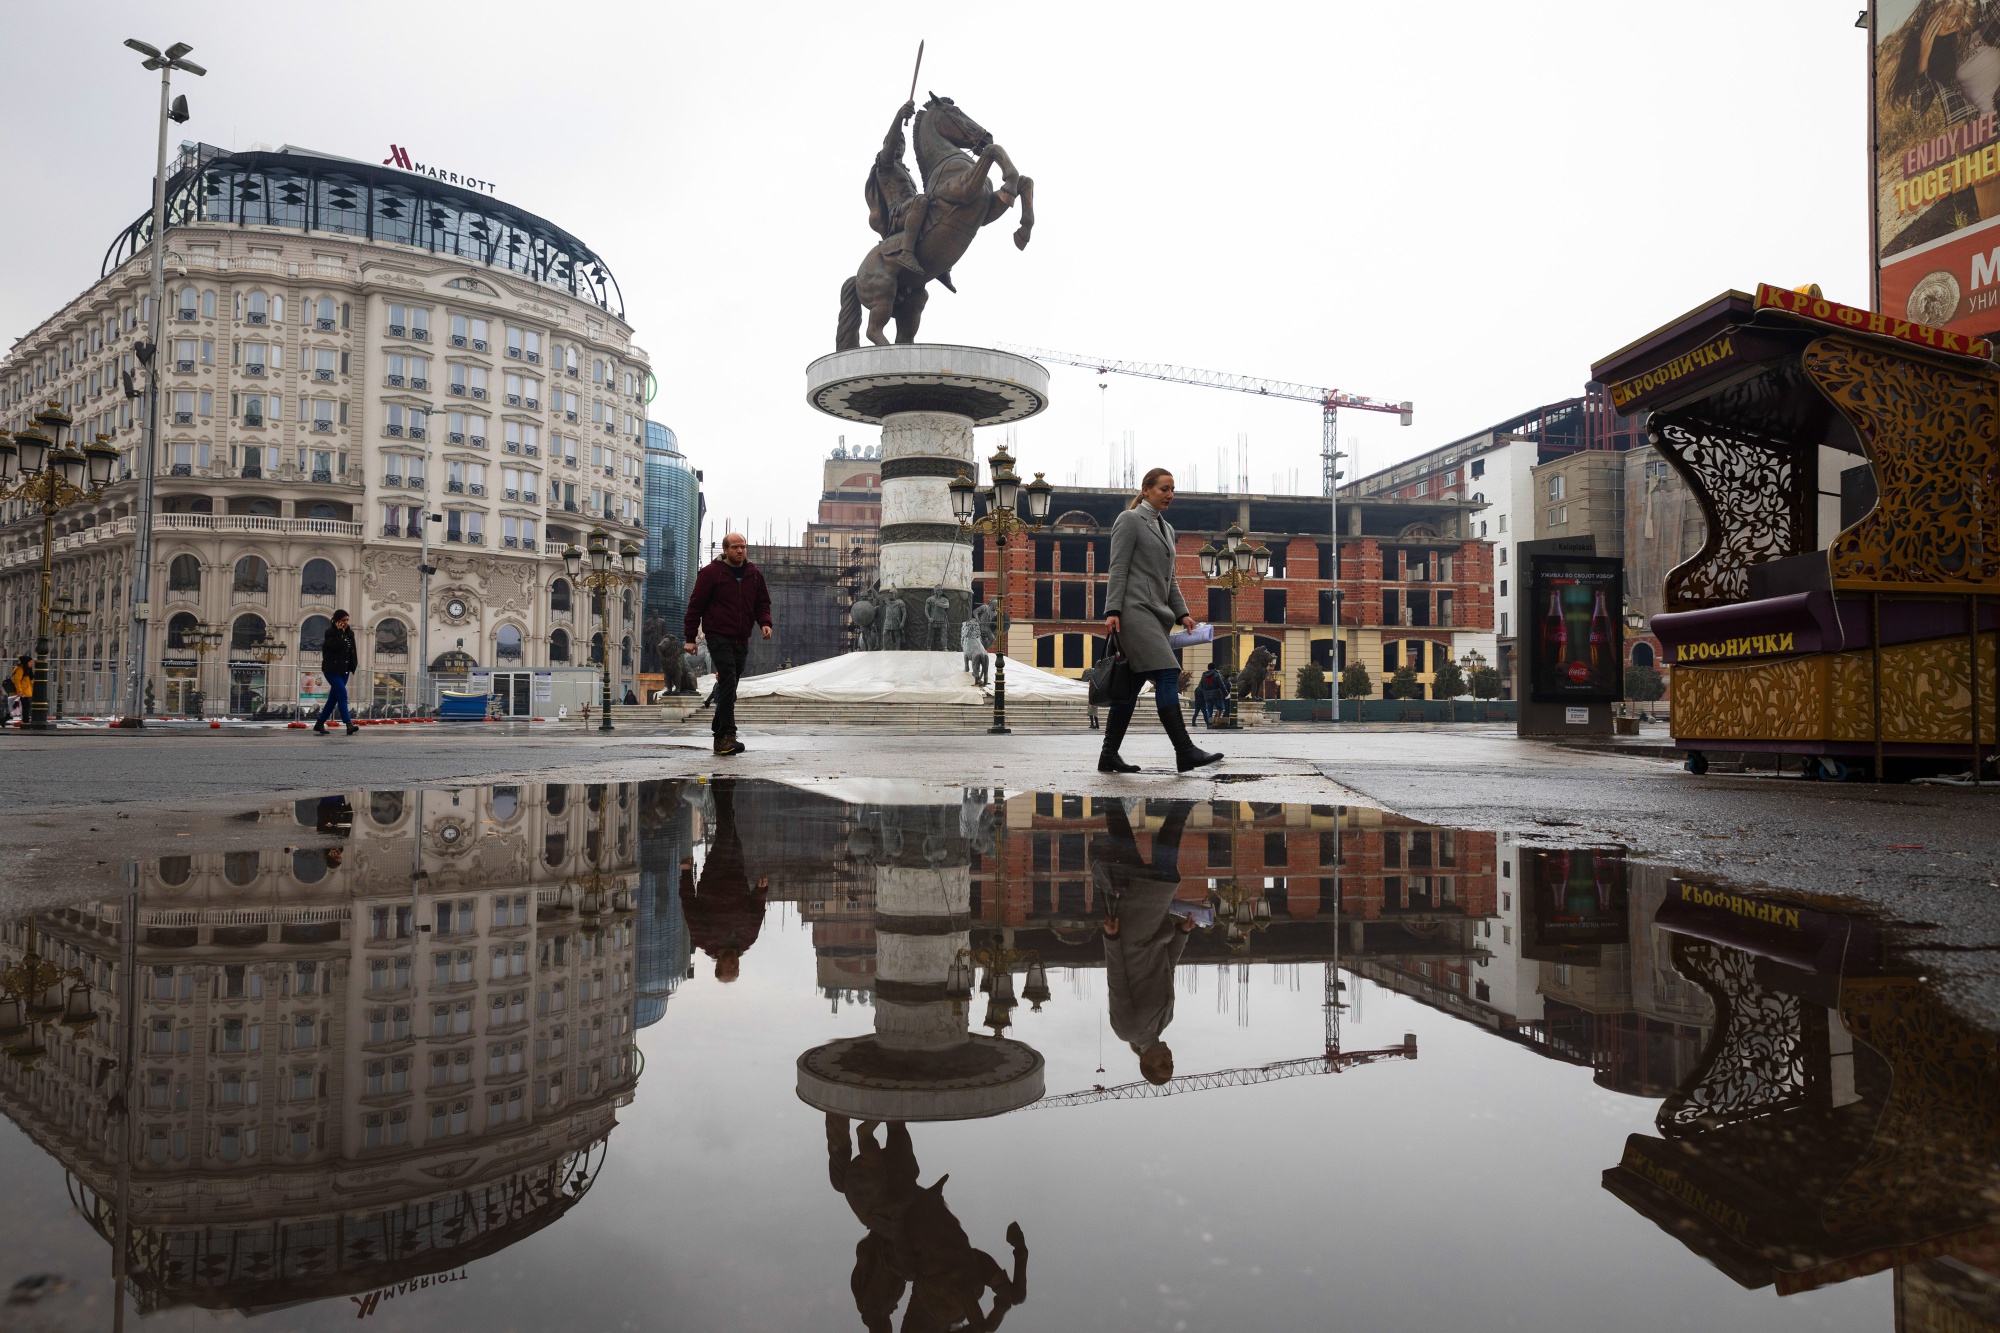 The &quot;Warrior on the Horse&quot; statue sits in a puddle reflection in central Skopje, North Macedonia.